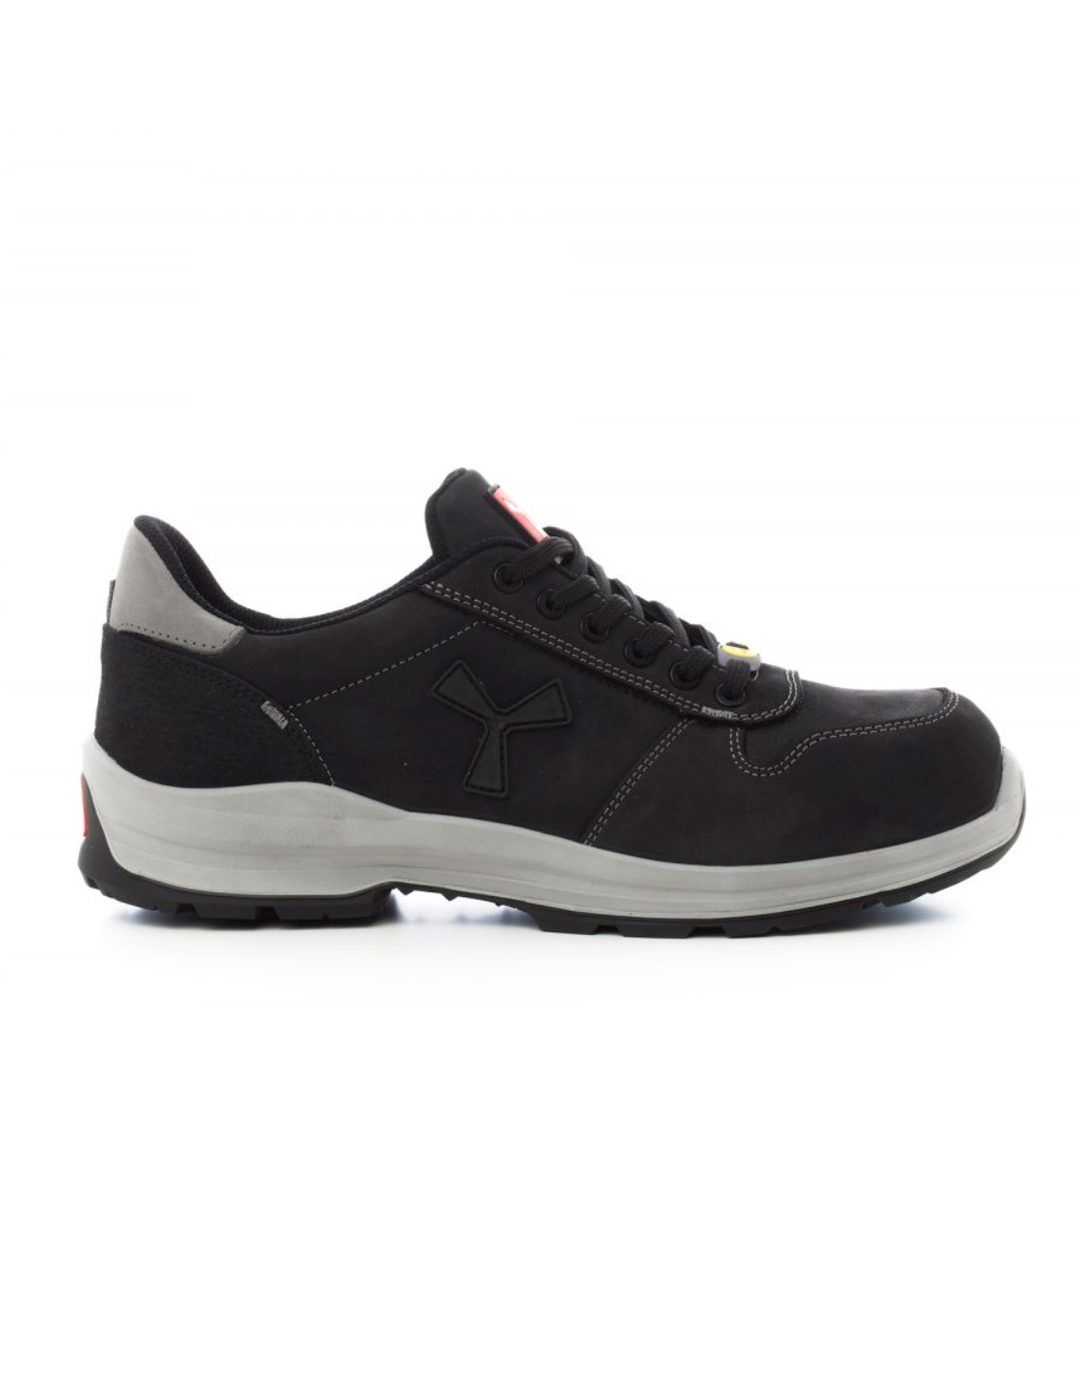 Get force low   negro total  1